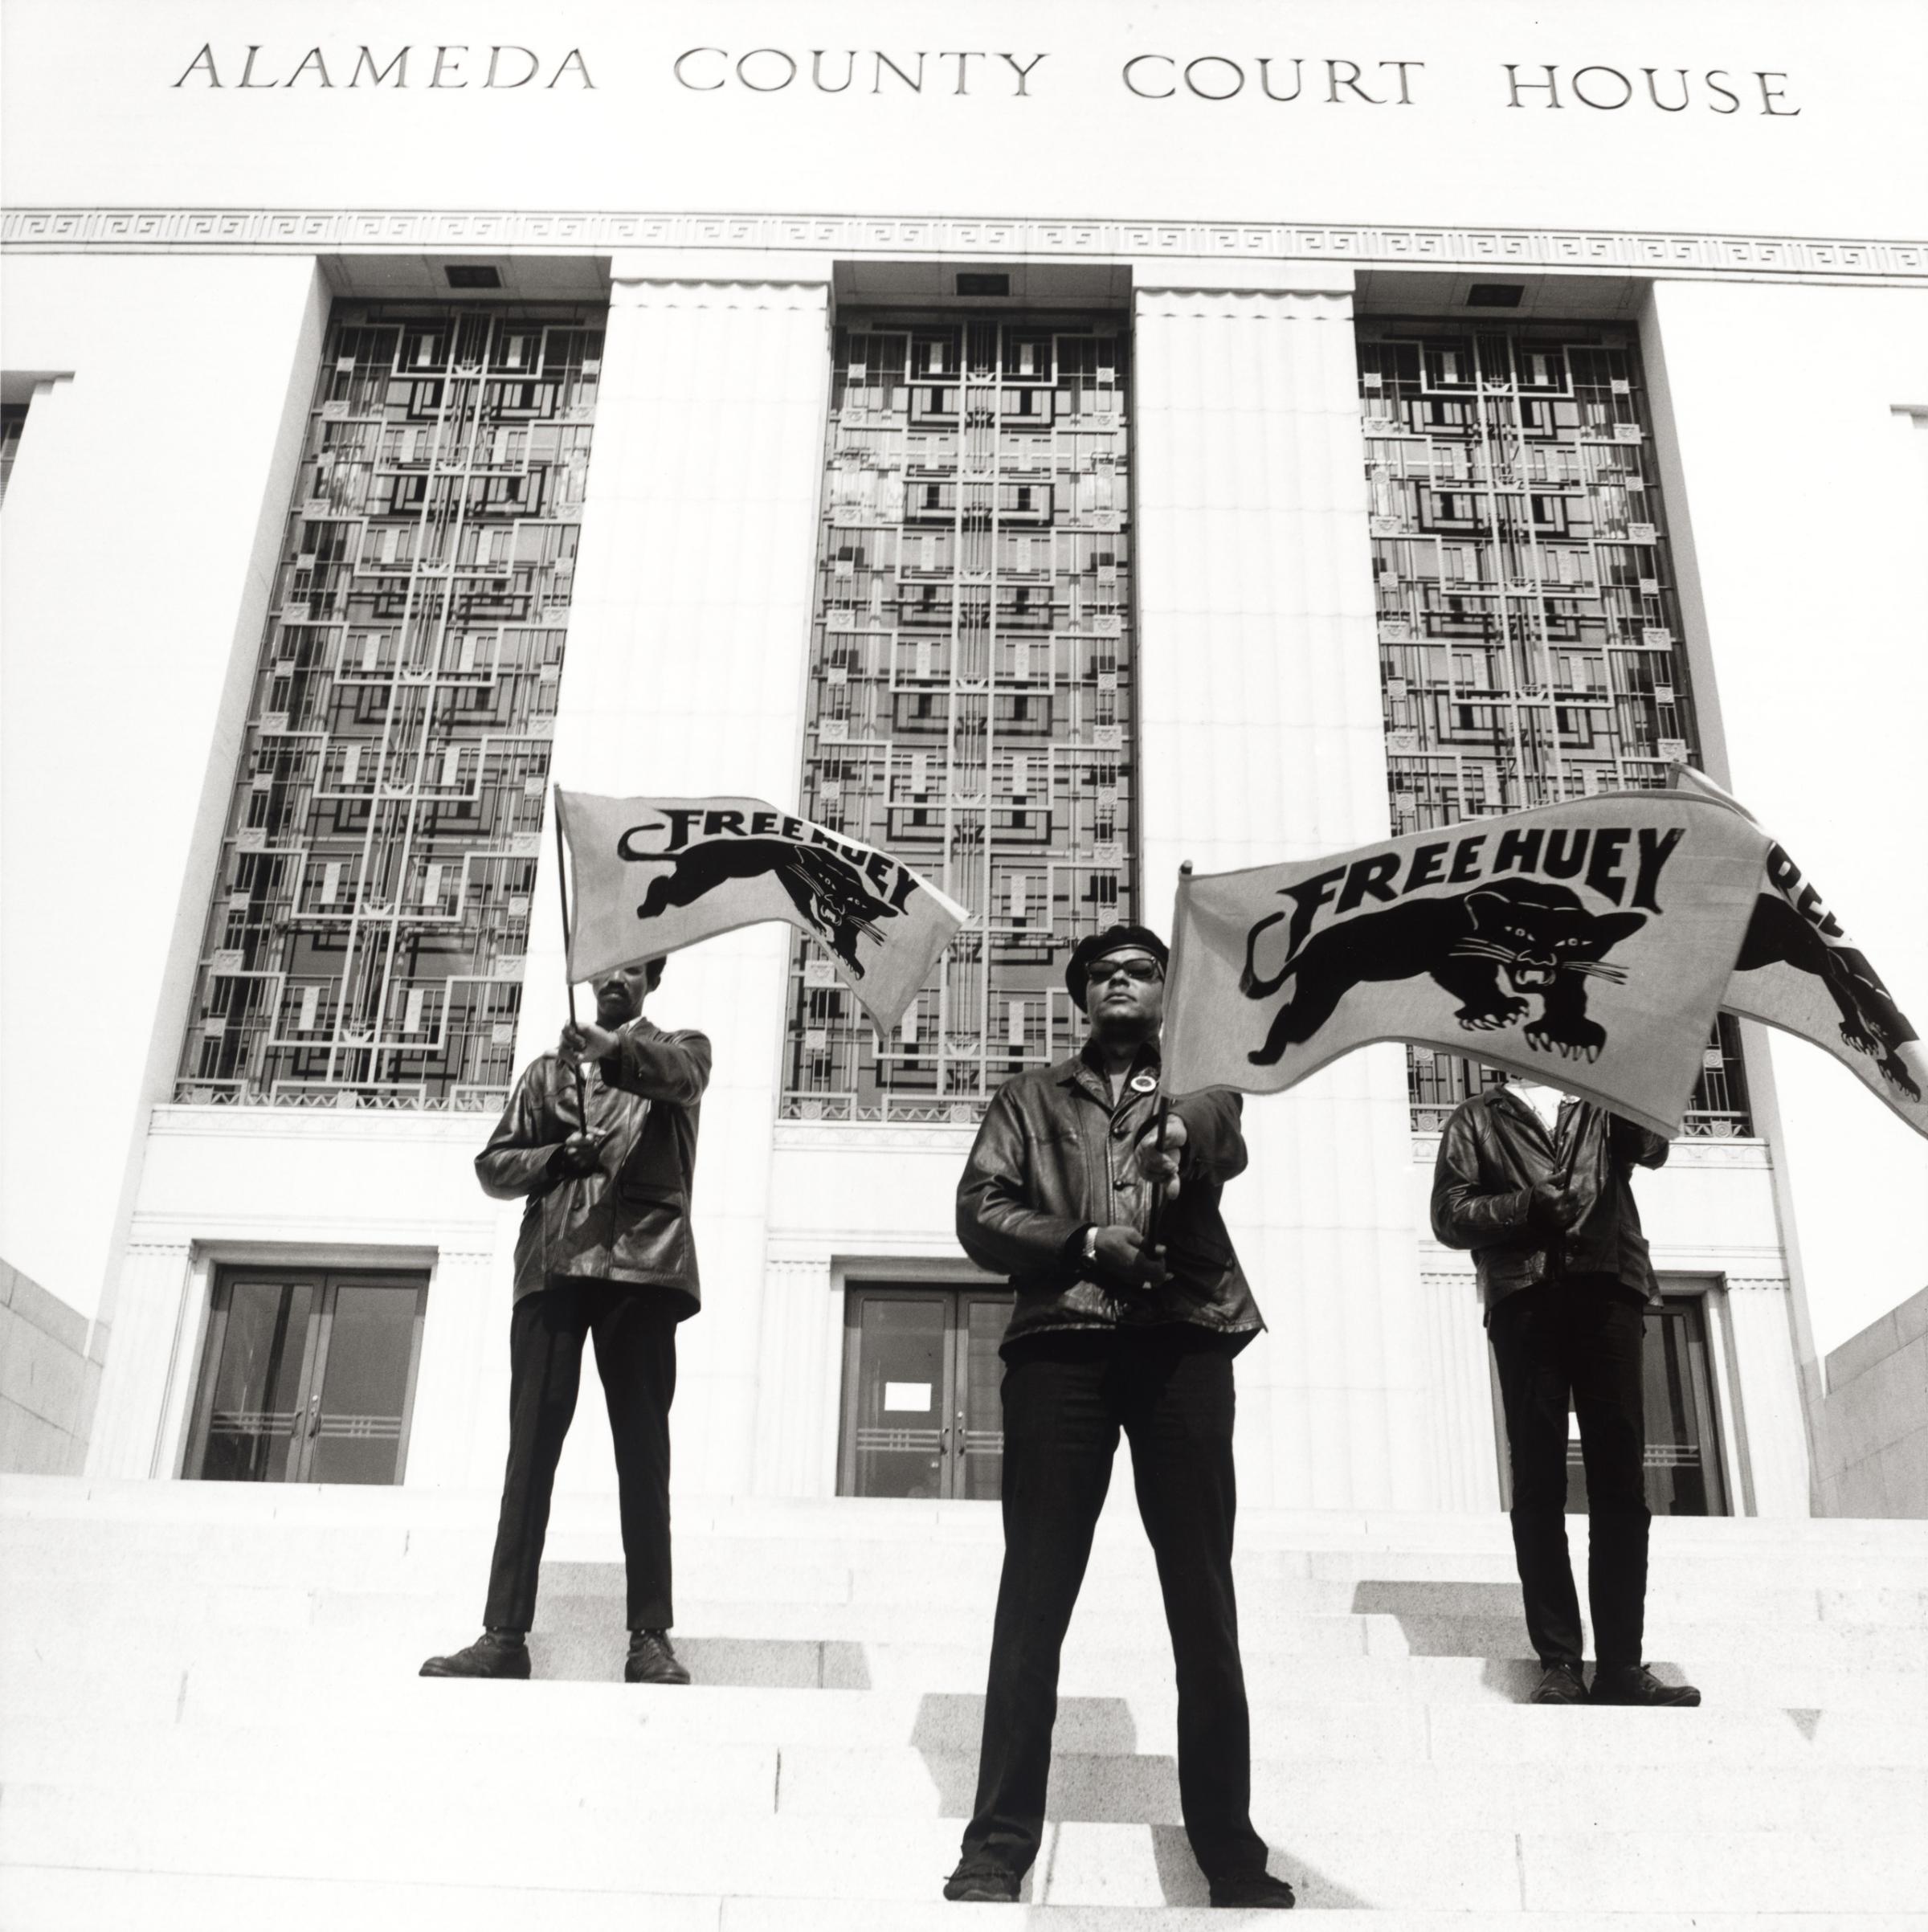 Black Panther demonstration, Alameda Co. Court House, Oakland, California, during Huey Newton's trial, #71